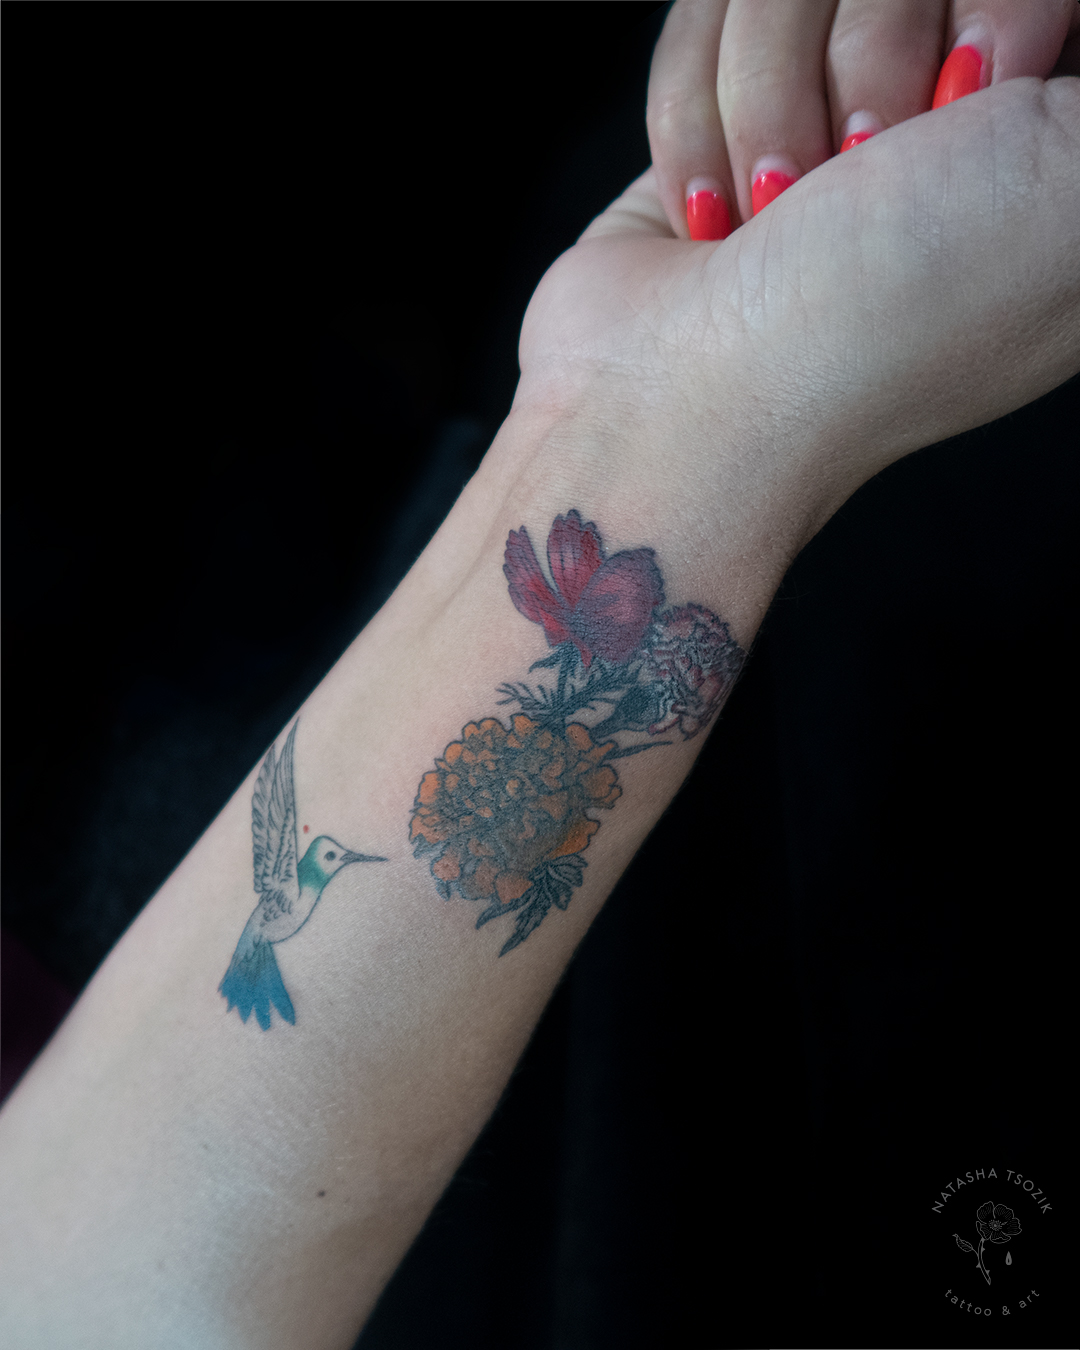 Healed floral tattoo with a humming bird on a wrist.